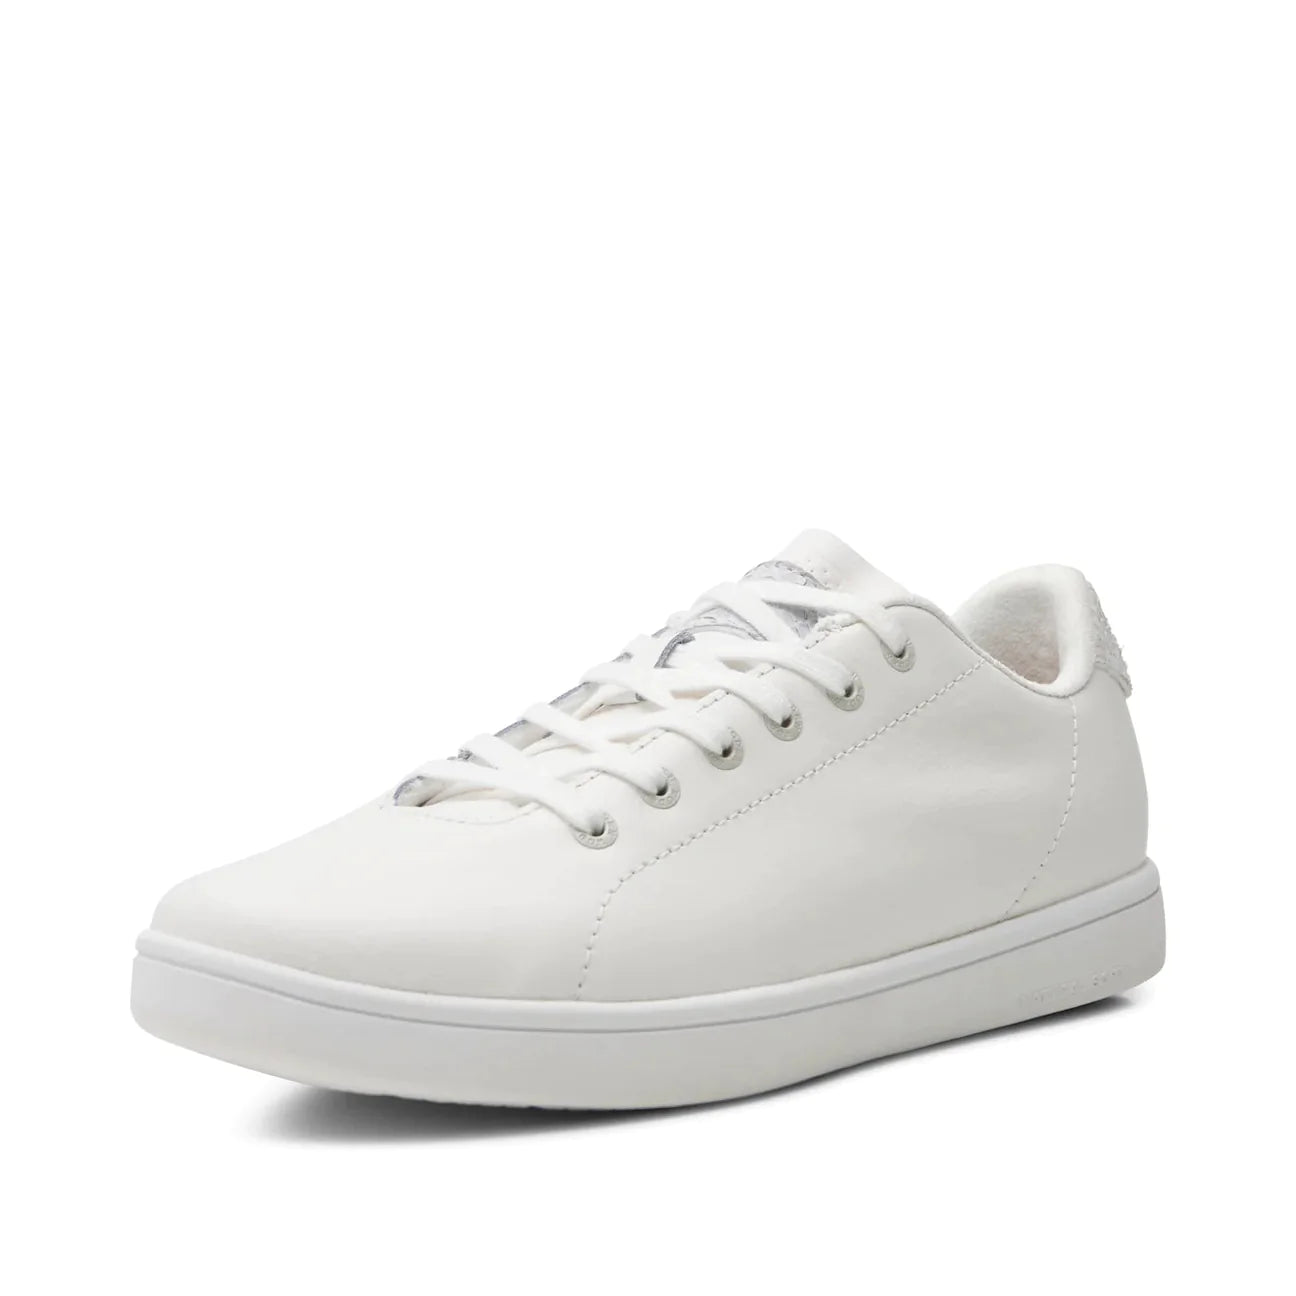 Women's Sneakers | Leather & Suede | High & Low Top | Chloé NZ